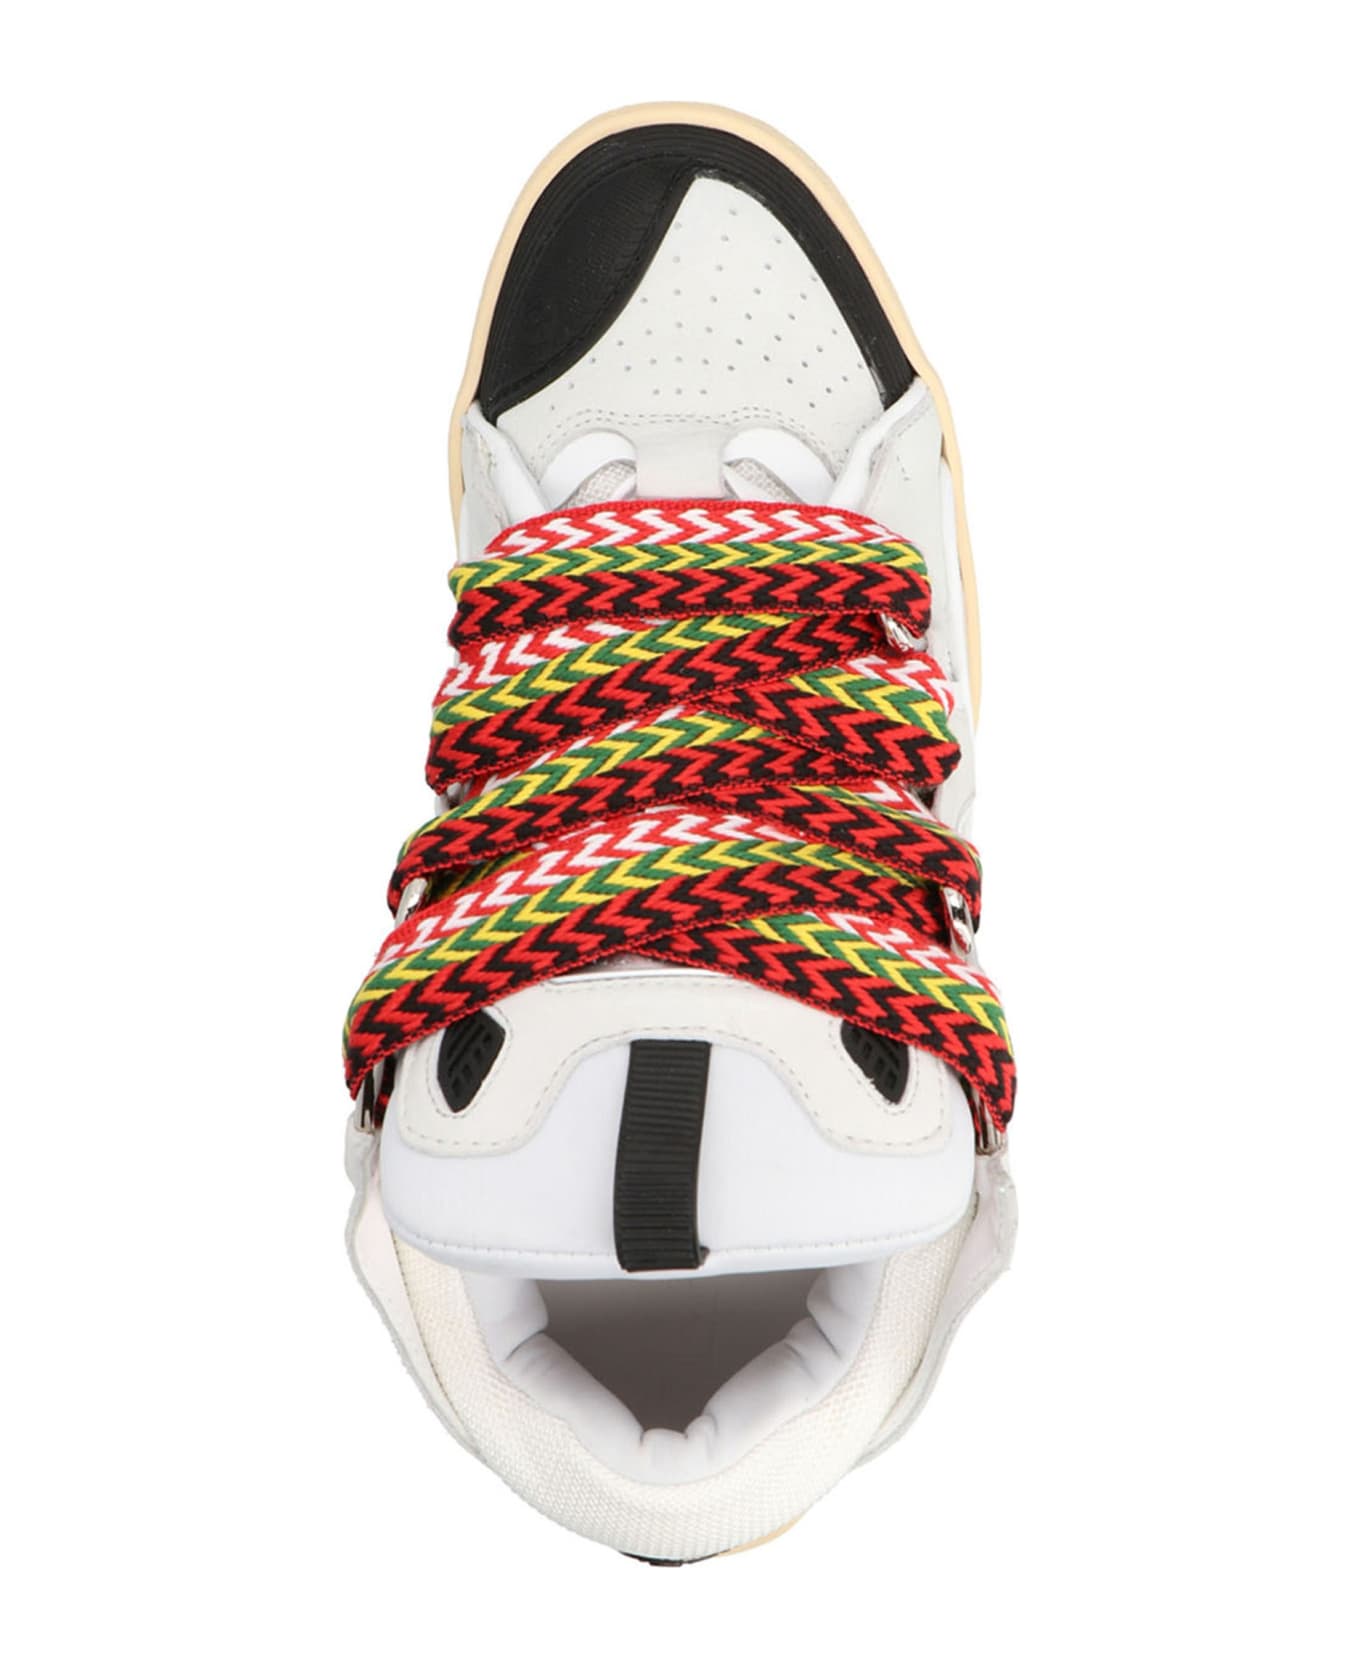 Lanvin 'curb' Sneakers - White